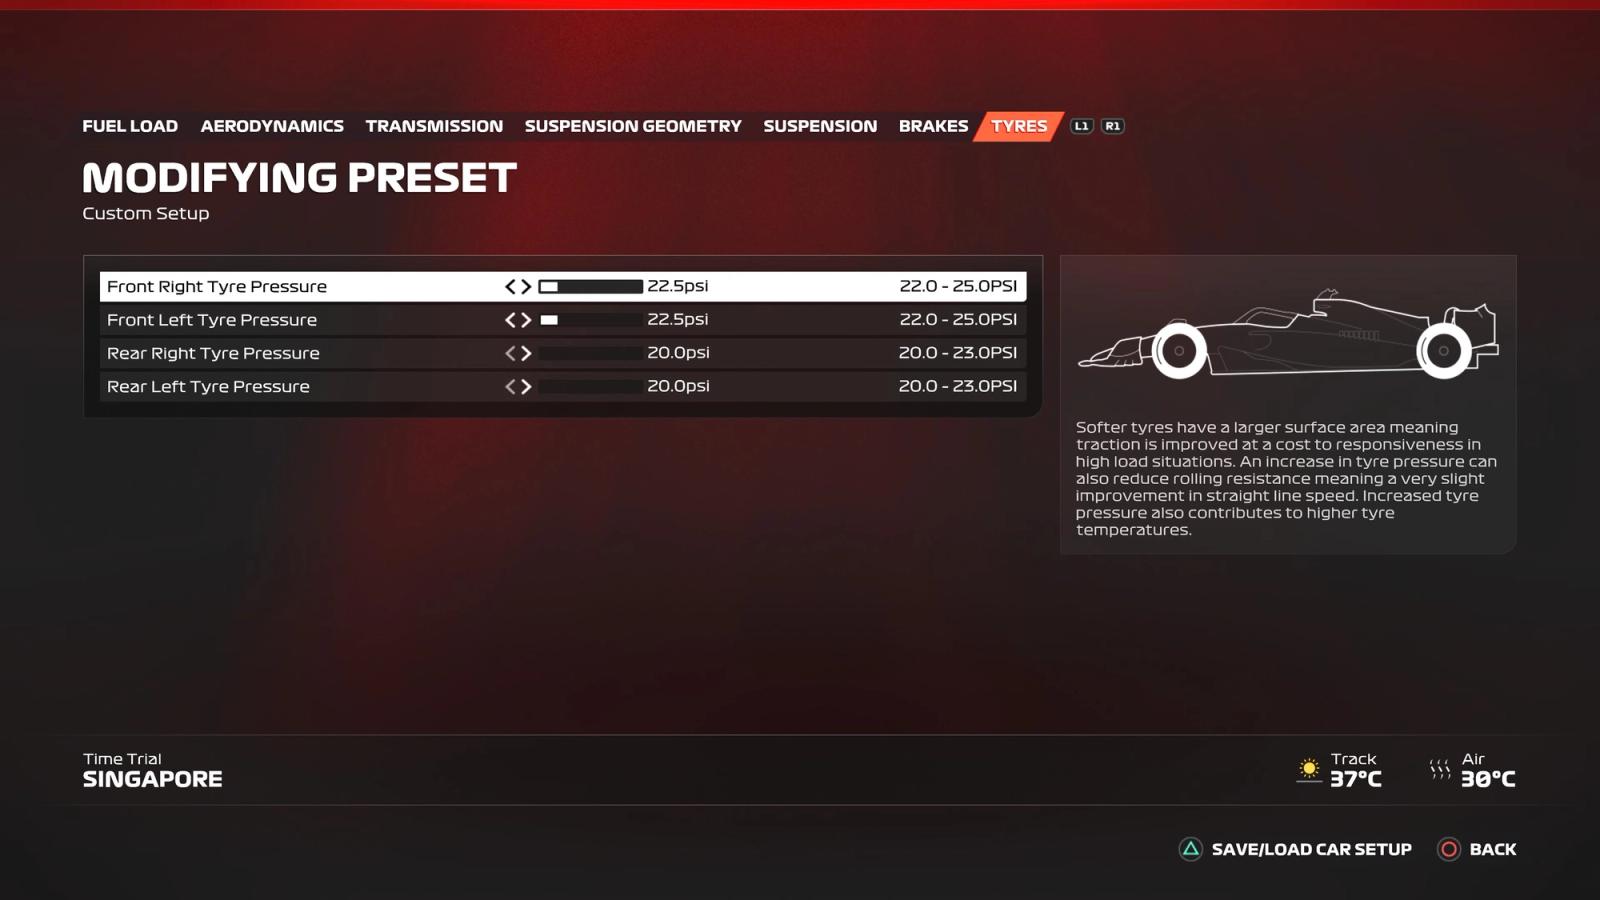 F1 23 Singapore setup tyres screen showing the ideal settings